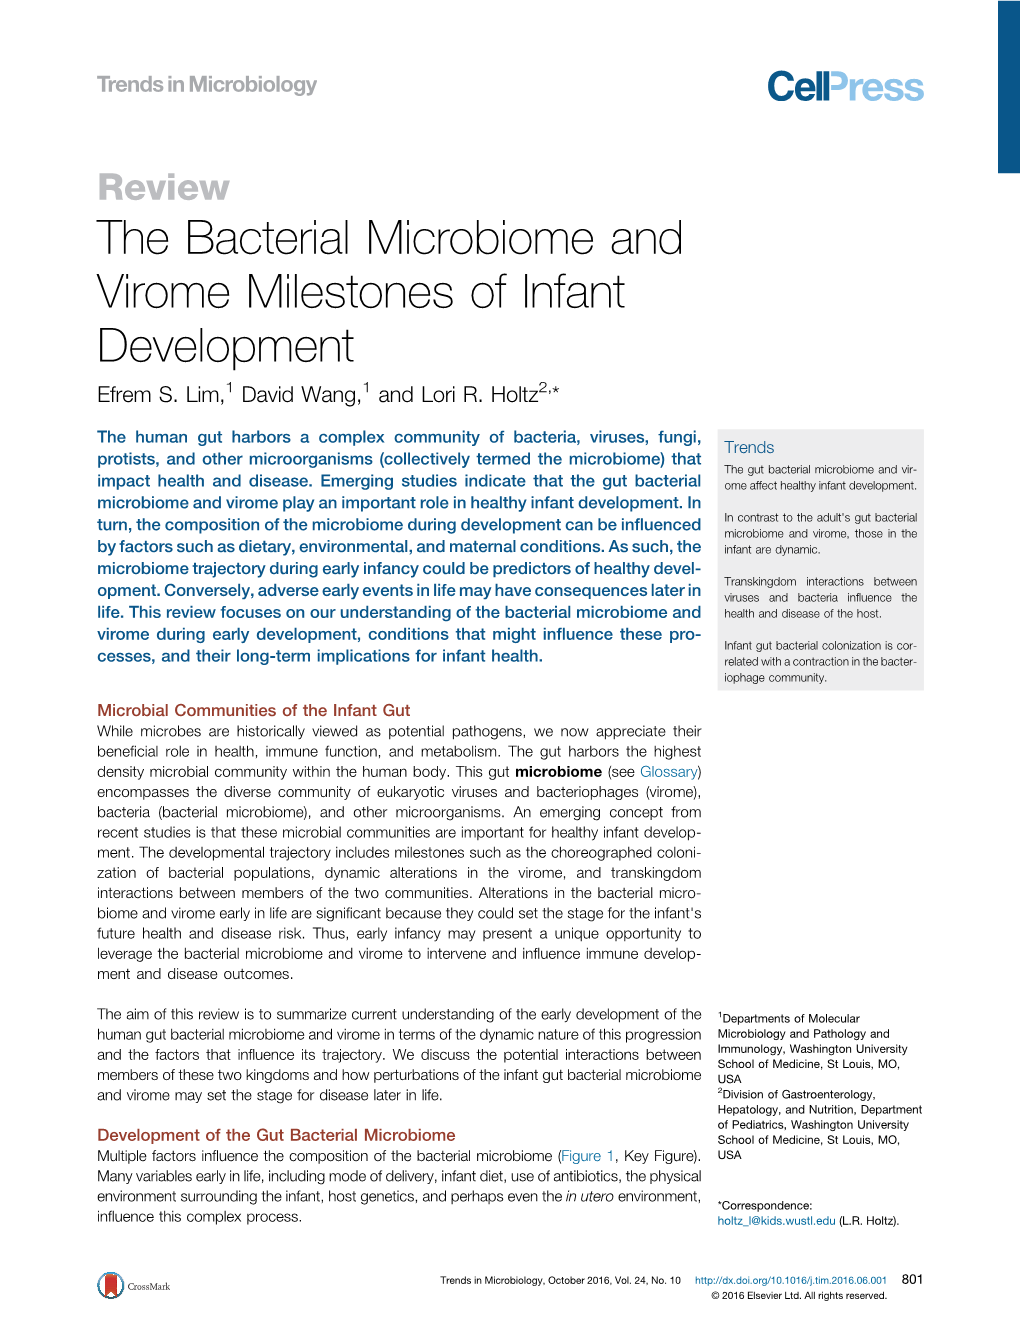 The Bacterial Microbiome and Virome Milestones of Infant Development